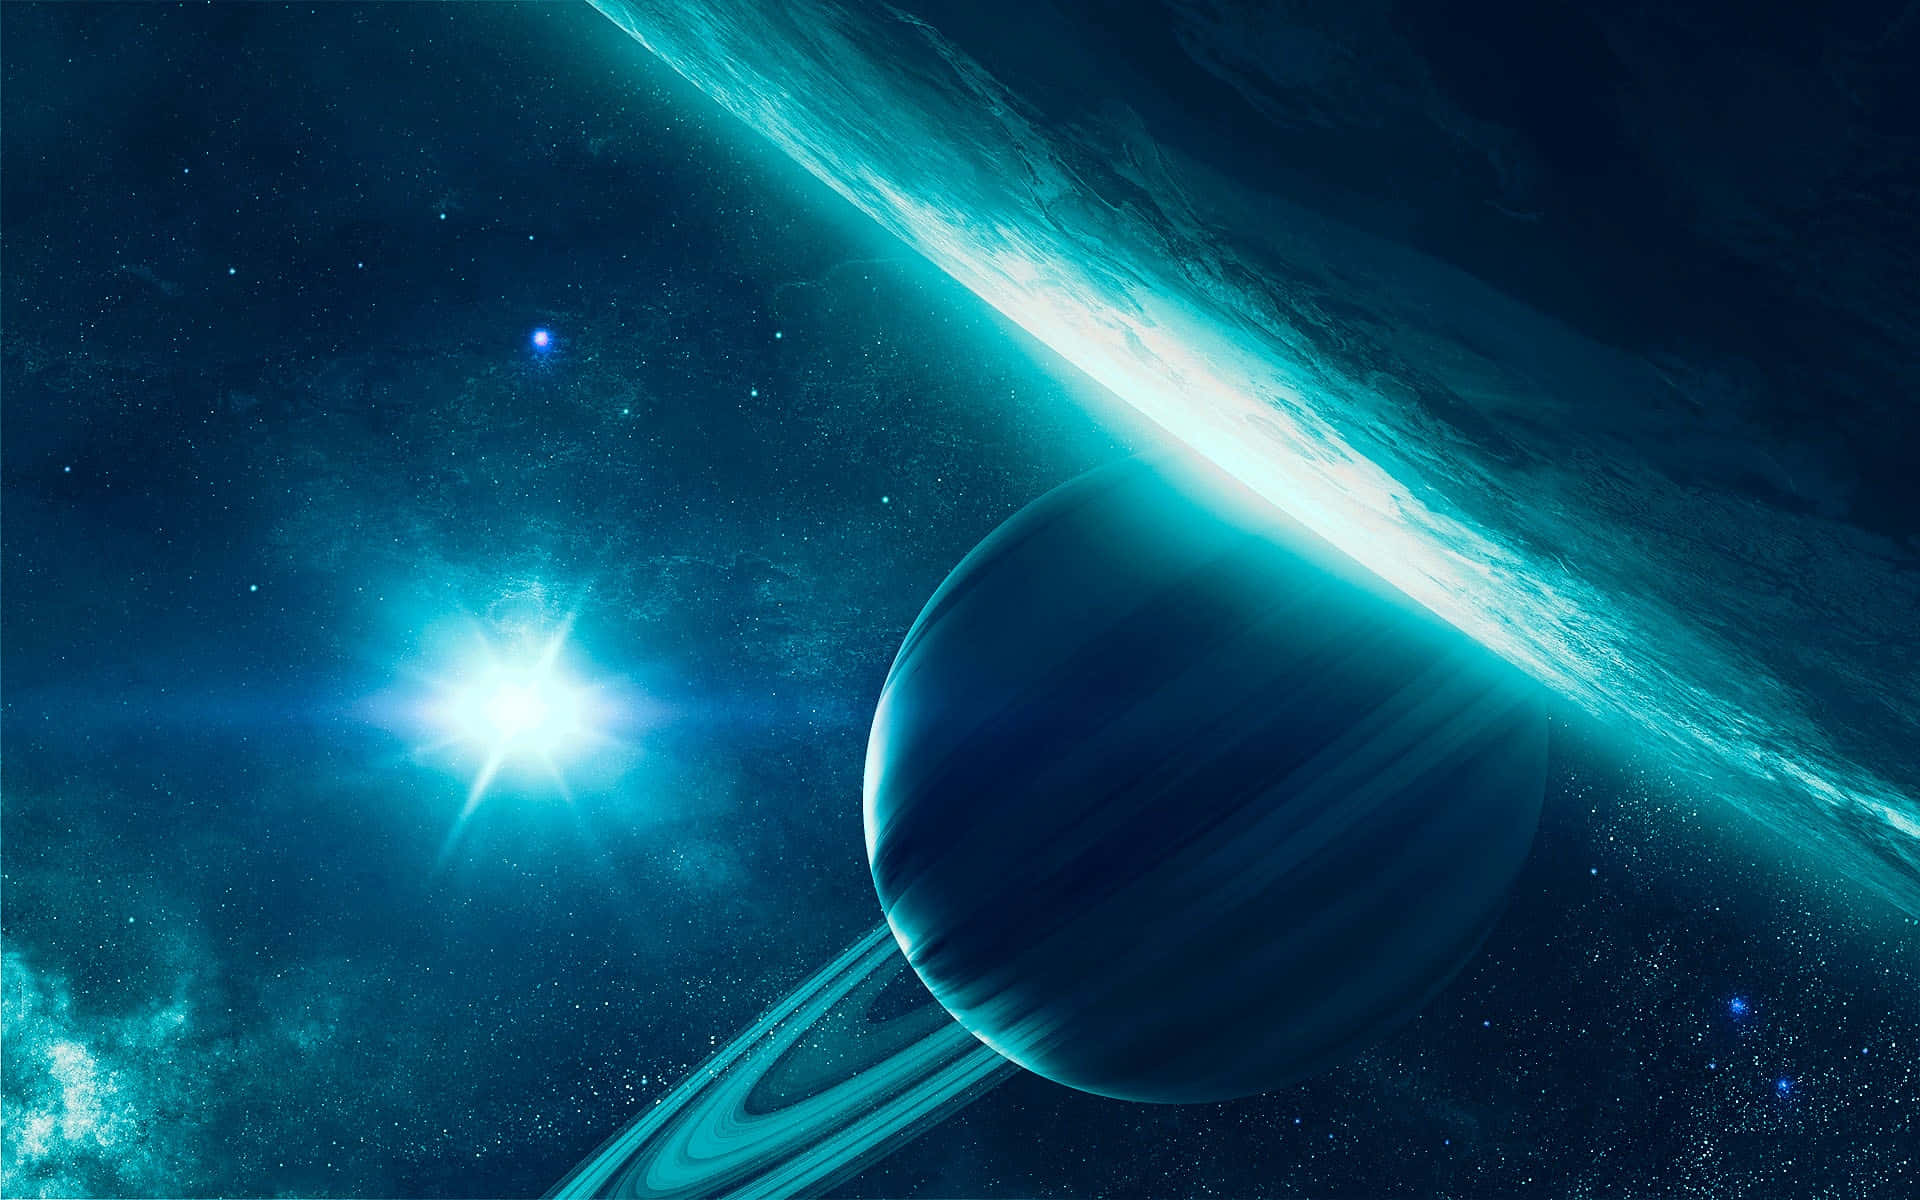 Explore the beauty of the galaxy with planet shining the brightest. Wallpaper